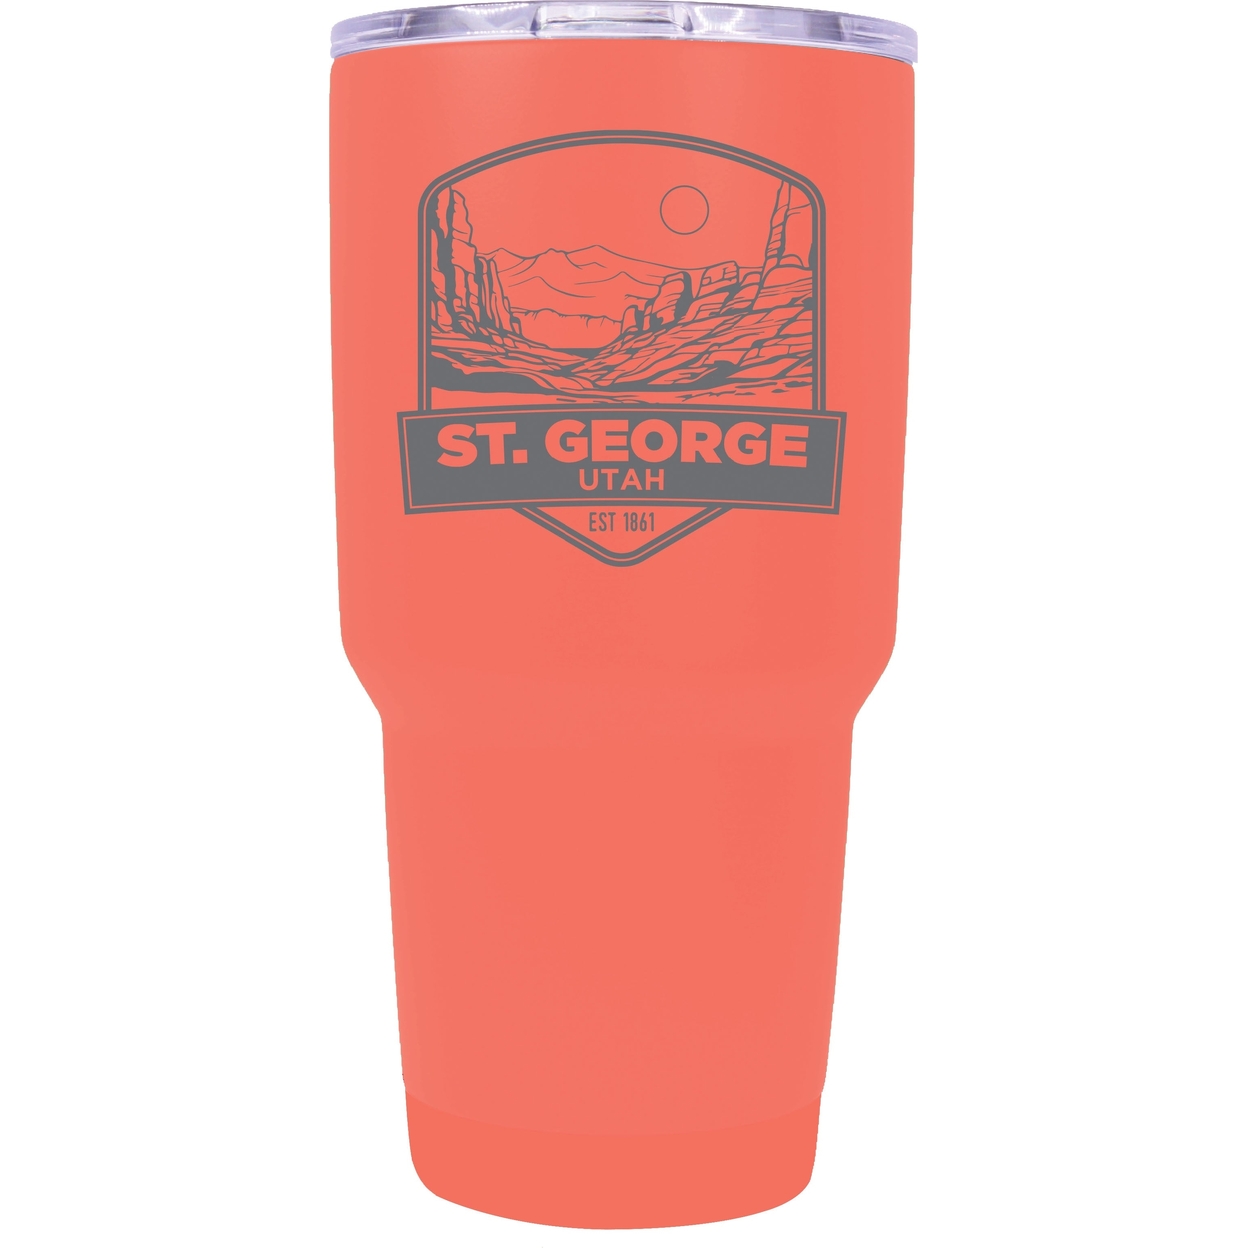 St. George Utah Souvenir 24 Oz Engraved Insulated Stainless Steel Tumbler - Coral,,Single Unit